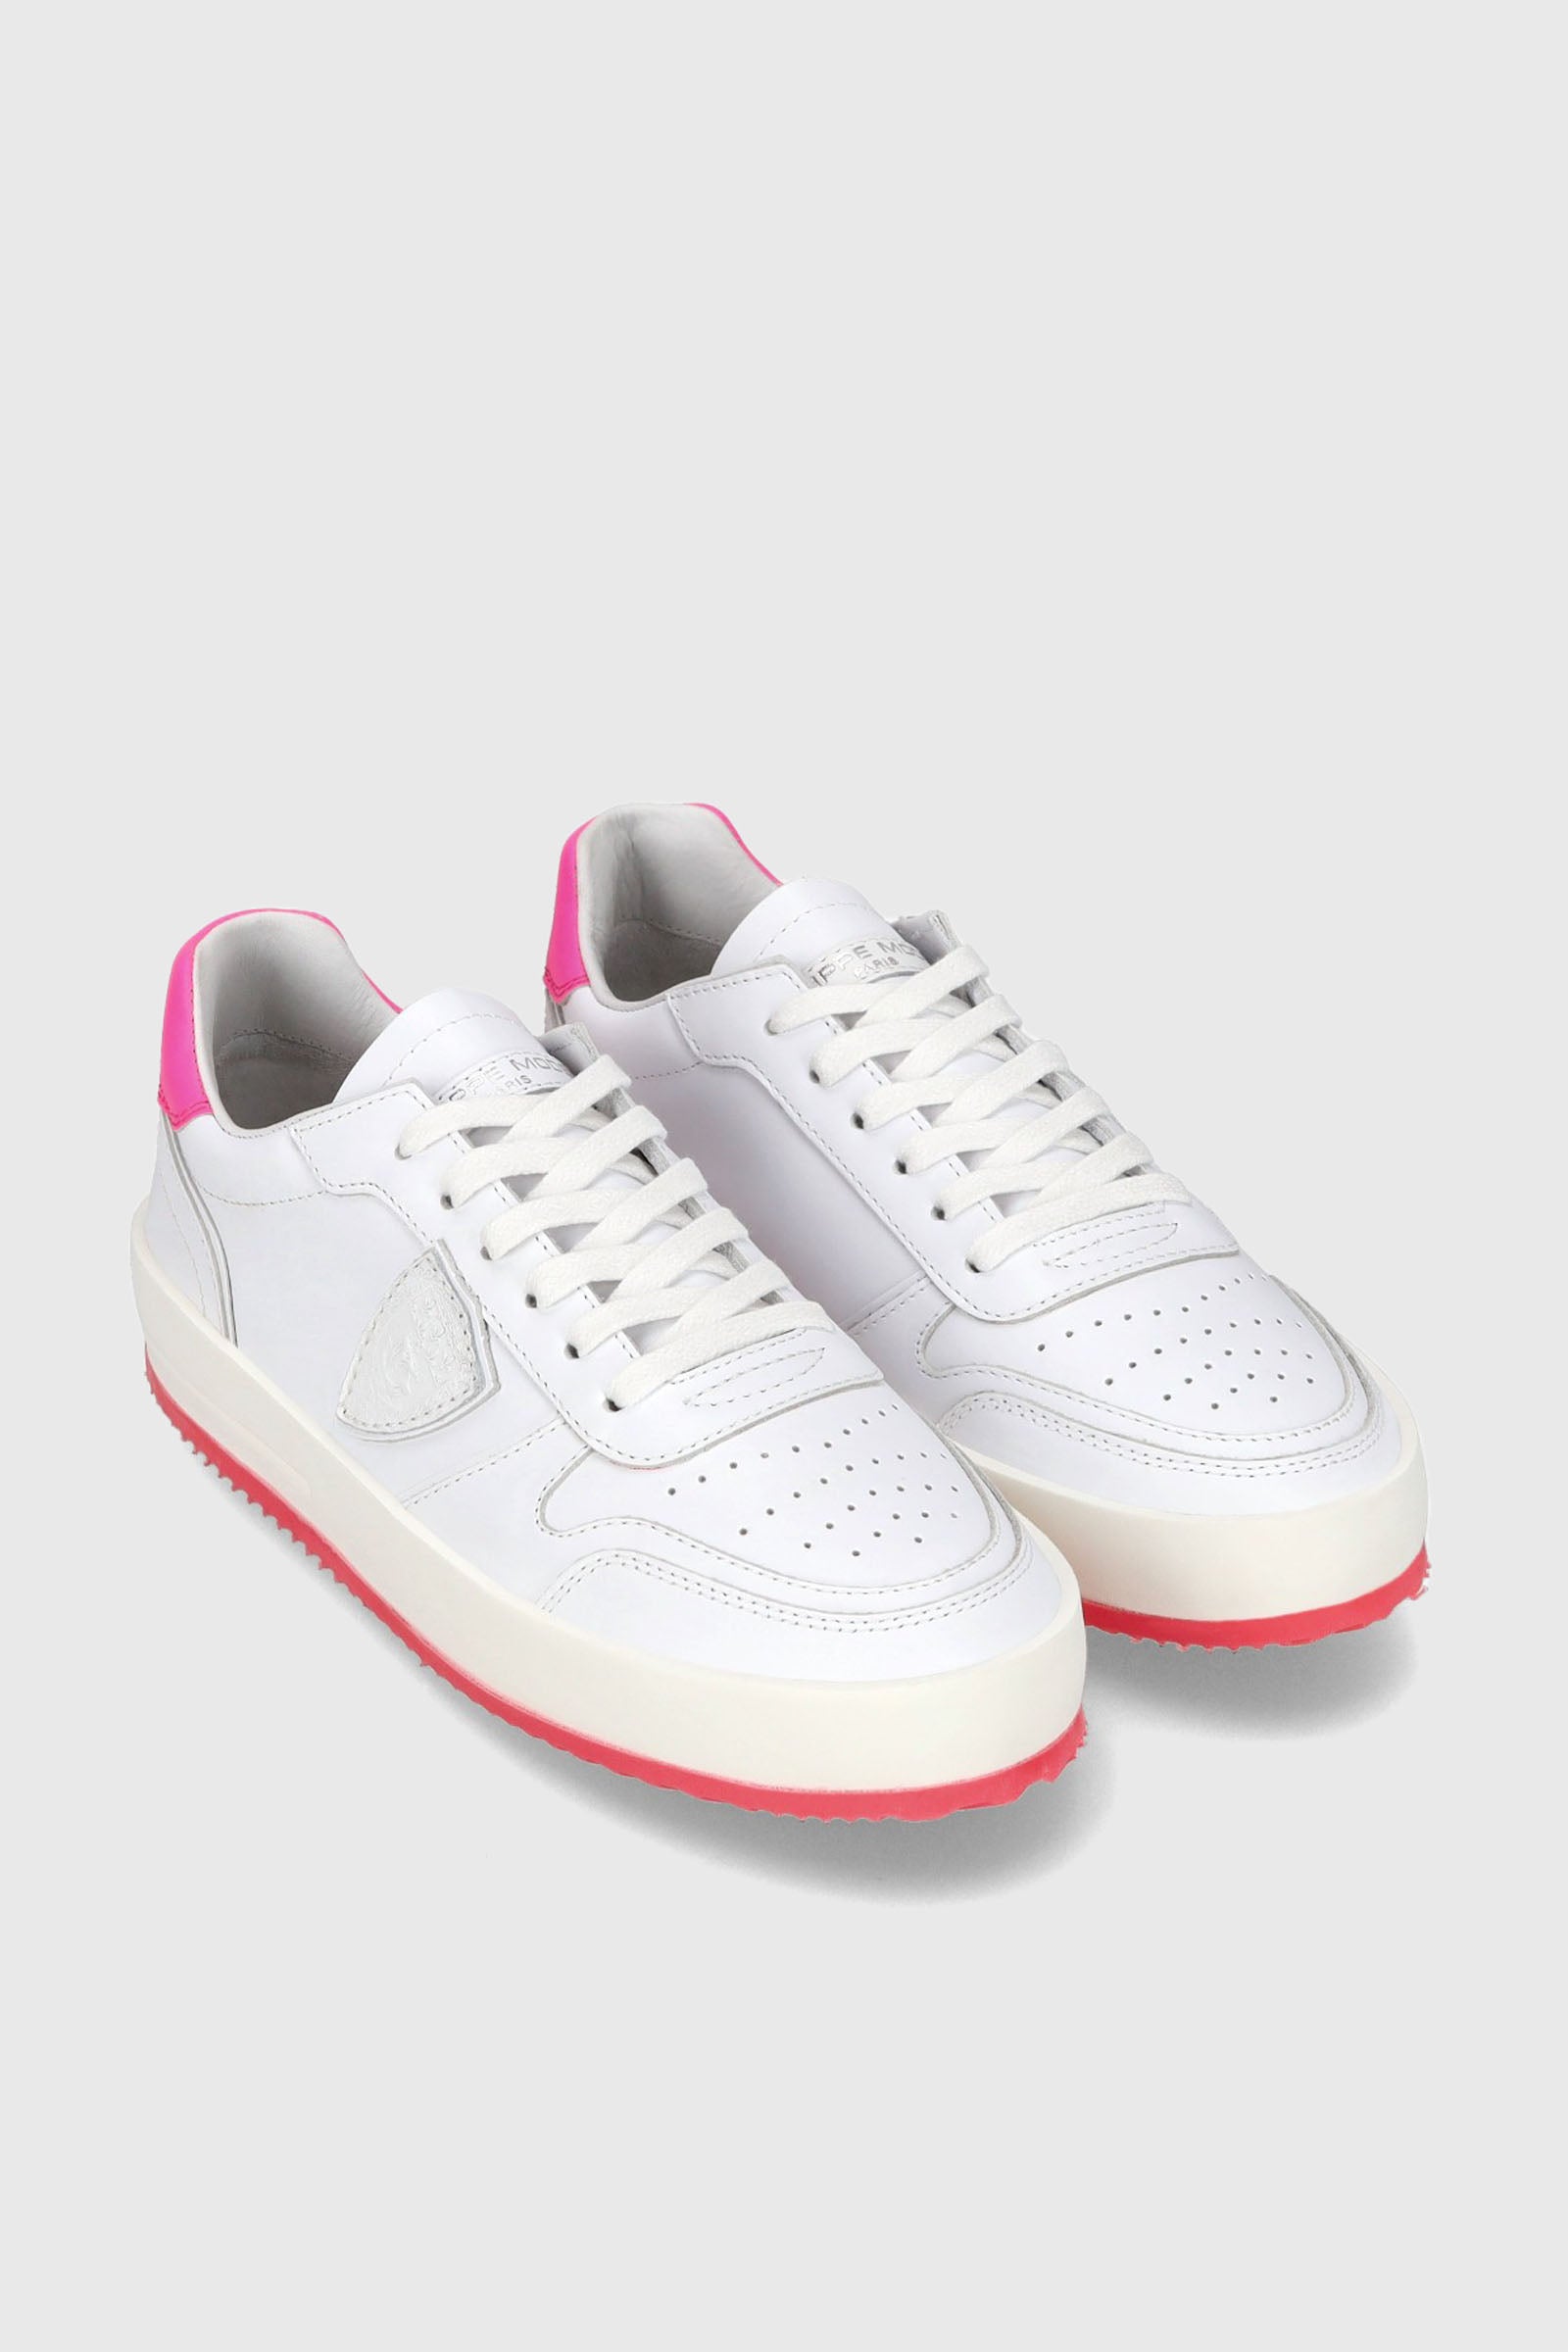 Philippe Model Sneaker Nice Veau Leather White/Fuxia - 2